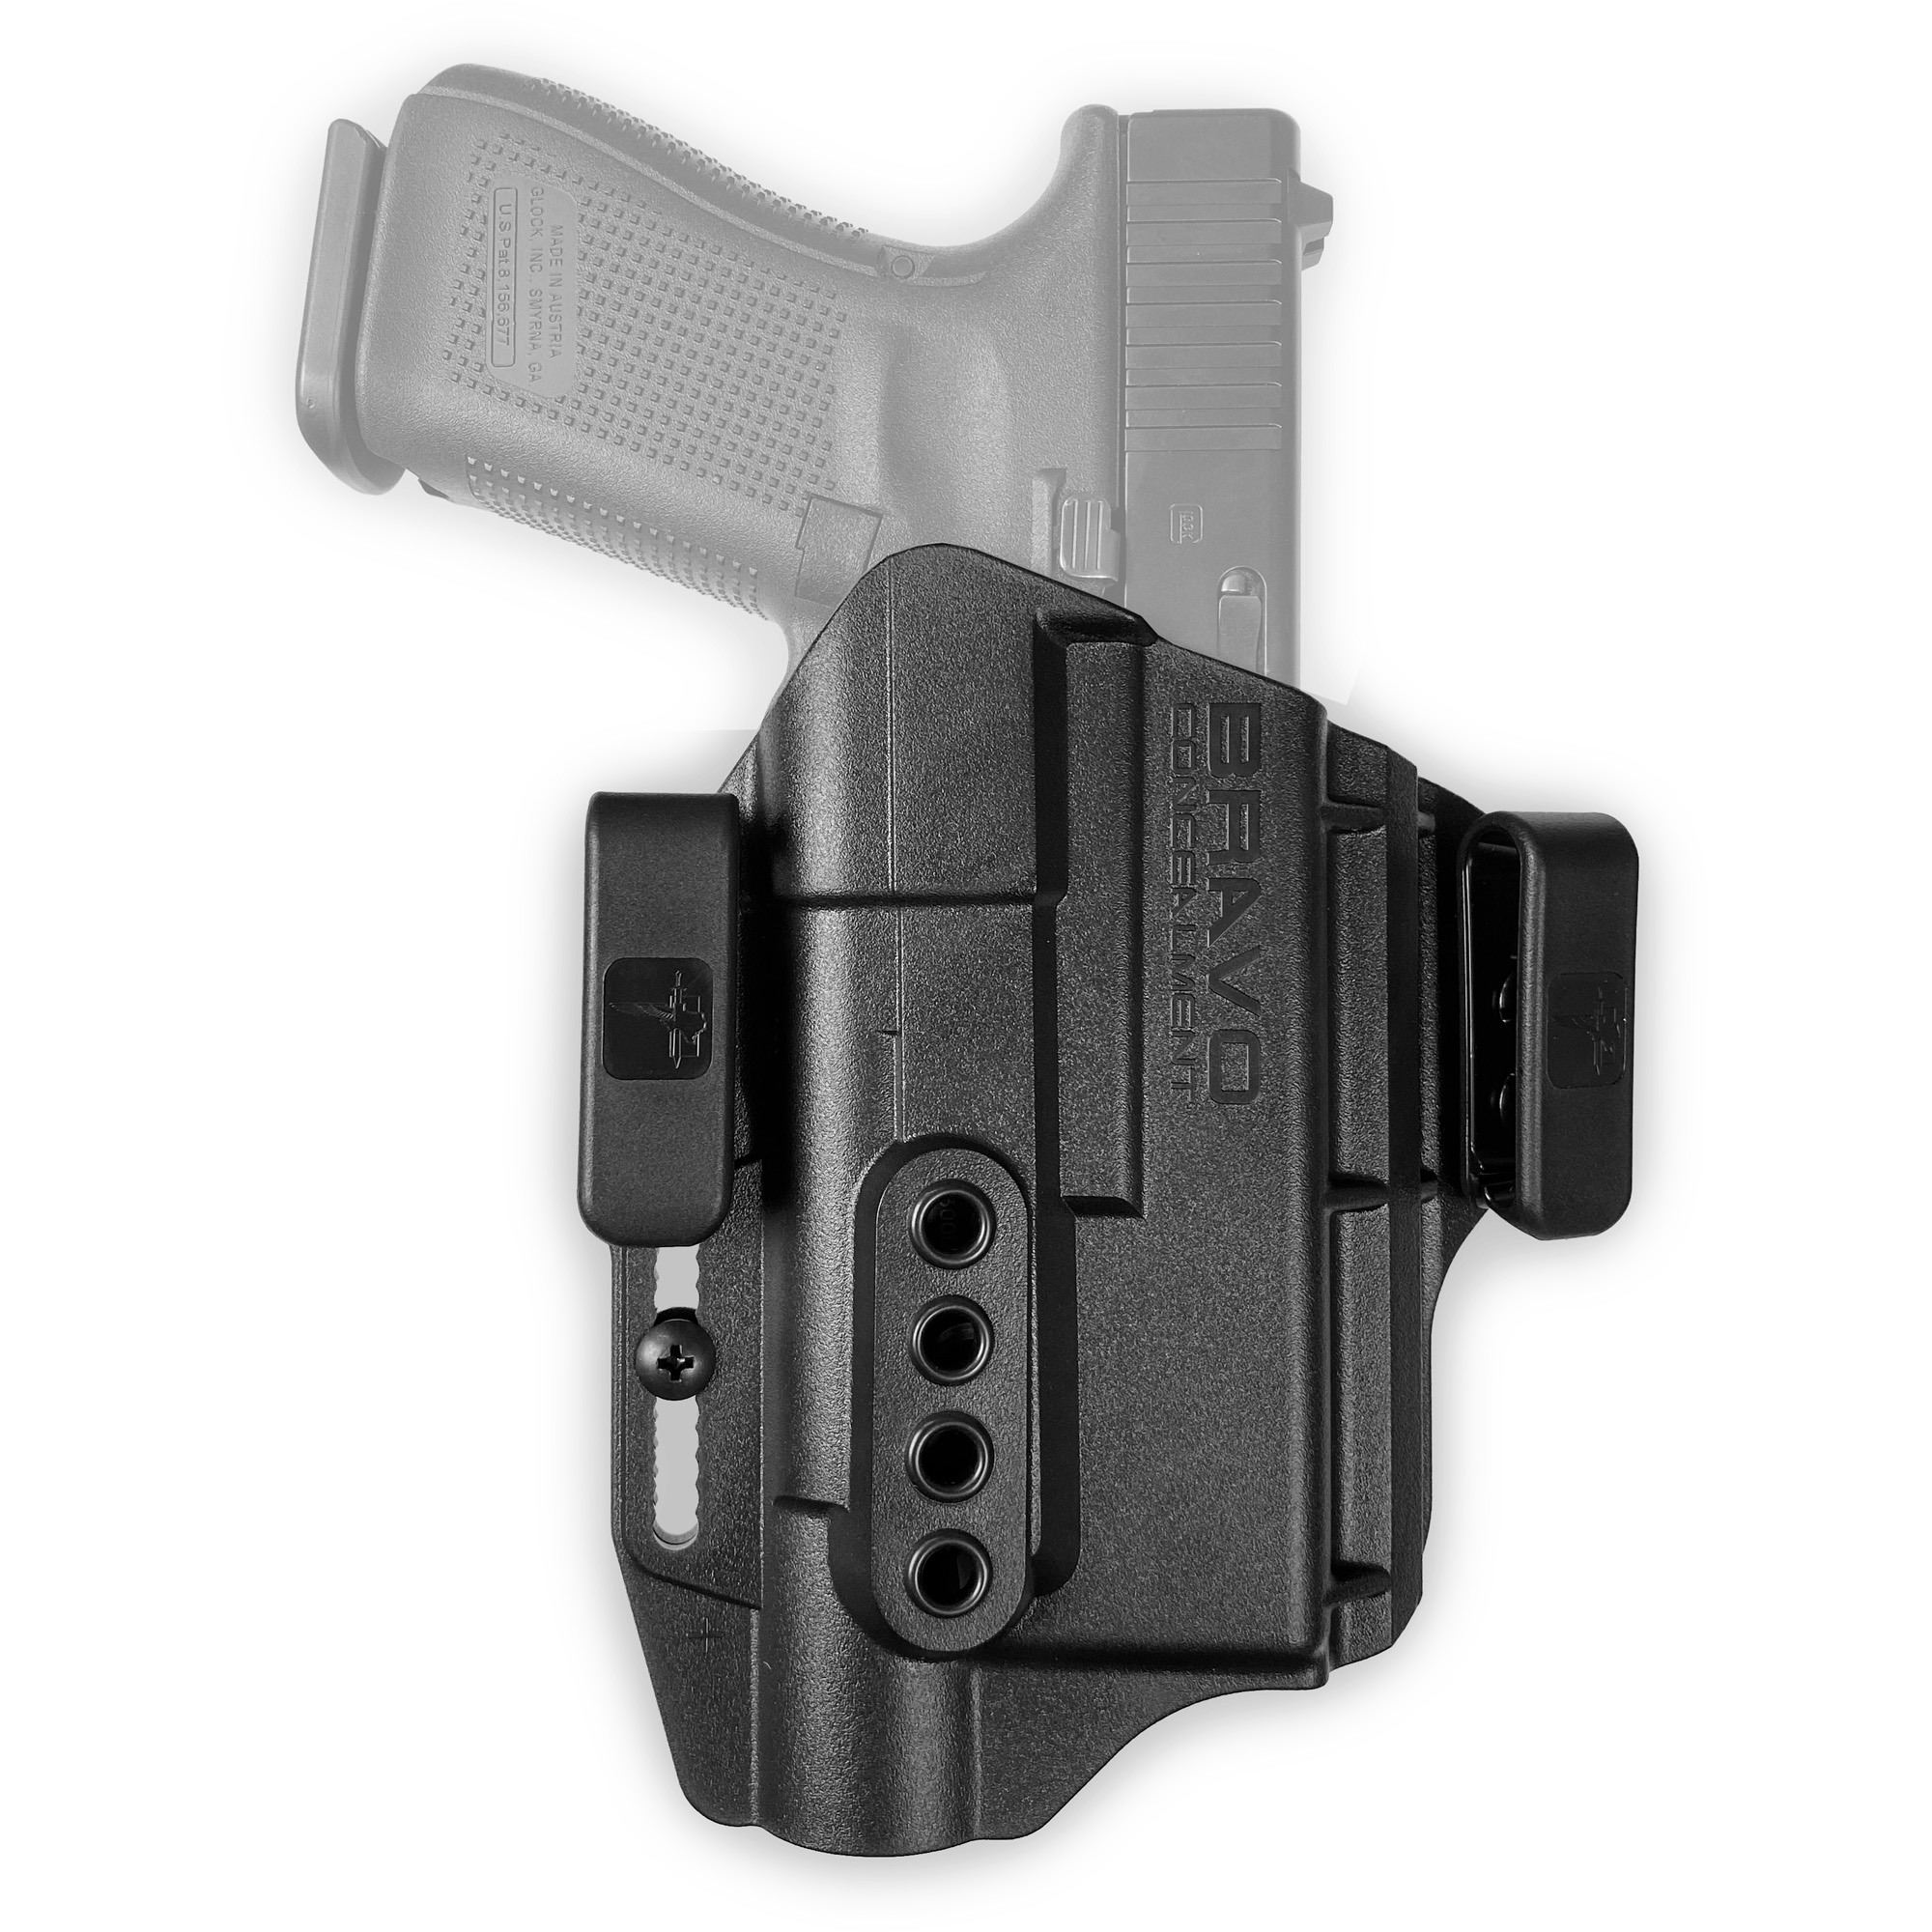 IV. Top Brands for Holsters Designed for Lightweight and Polymer Guns